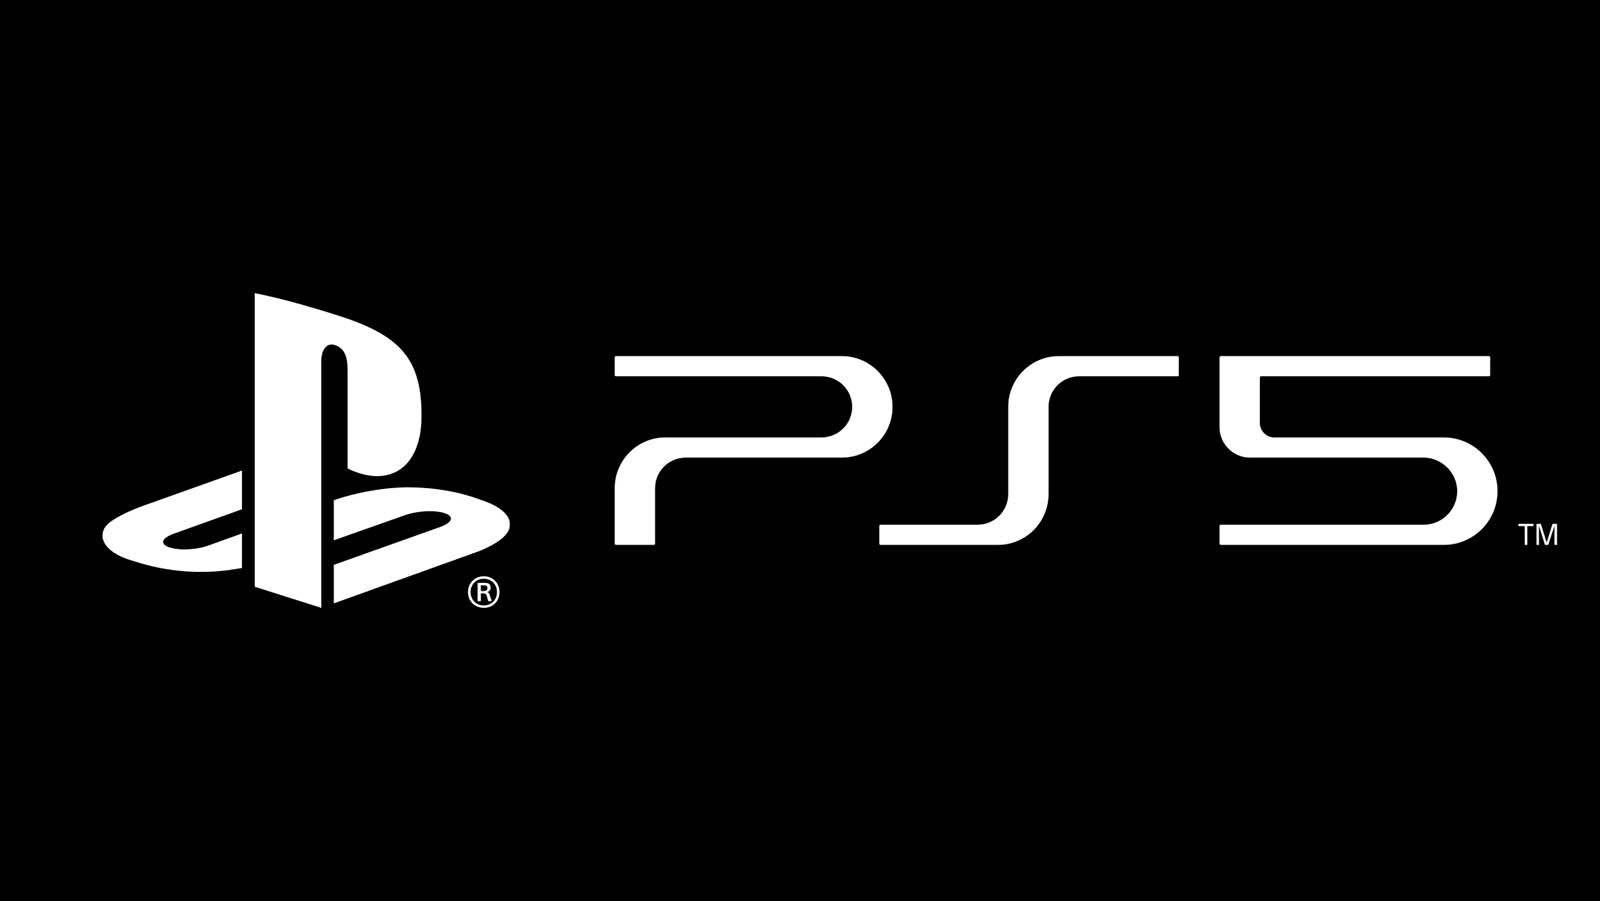 Sony Plans to Discuss PlayStation 5 Details in March 18 Video Stream